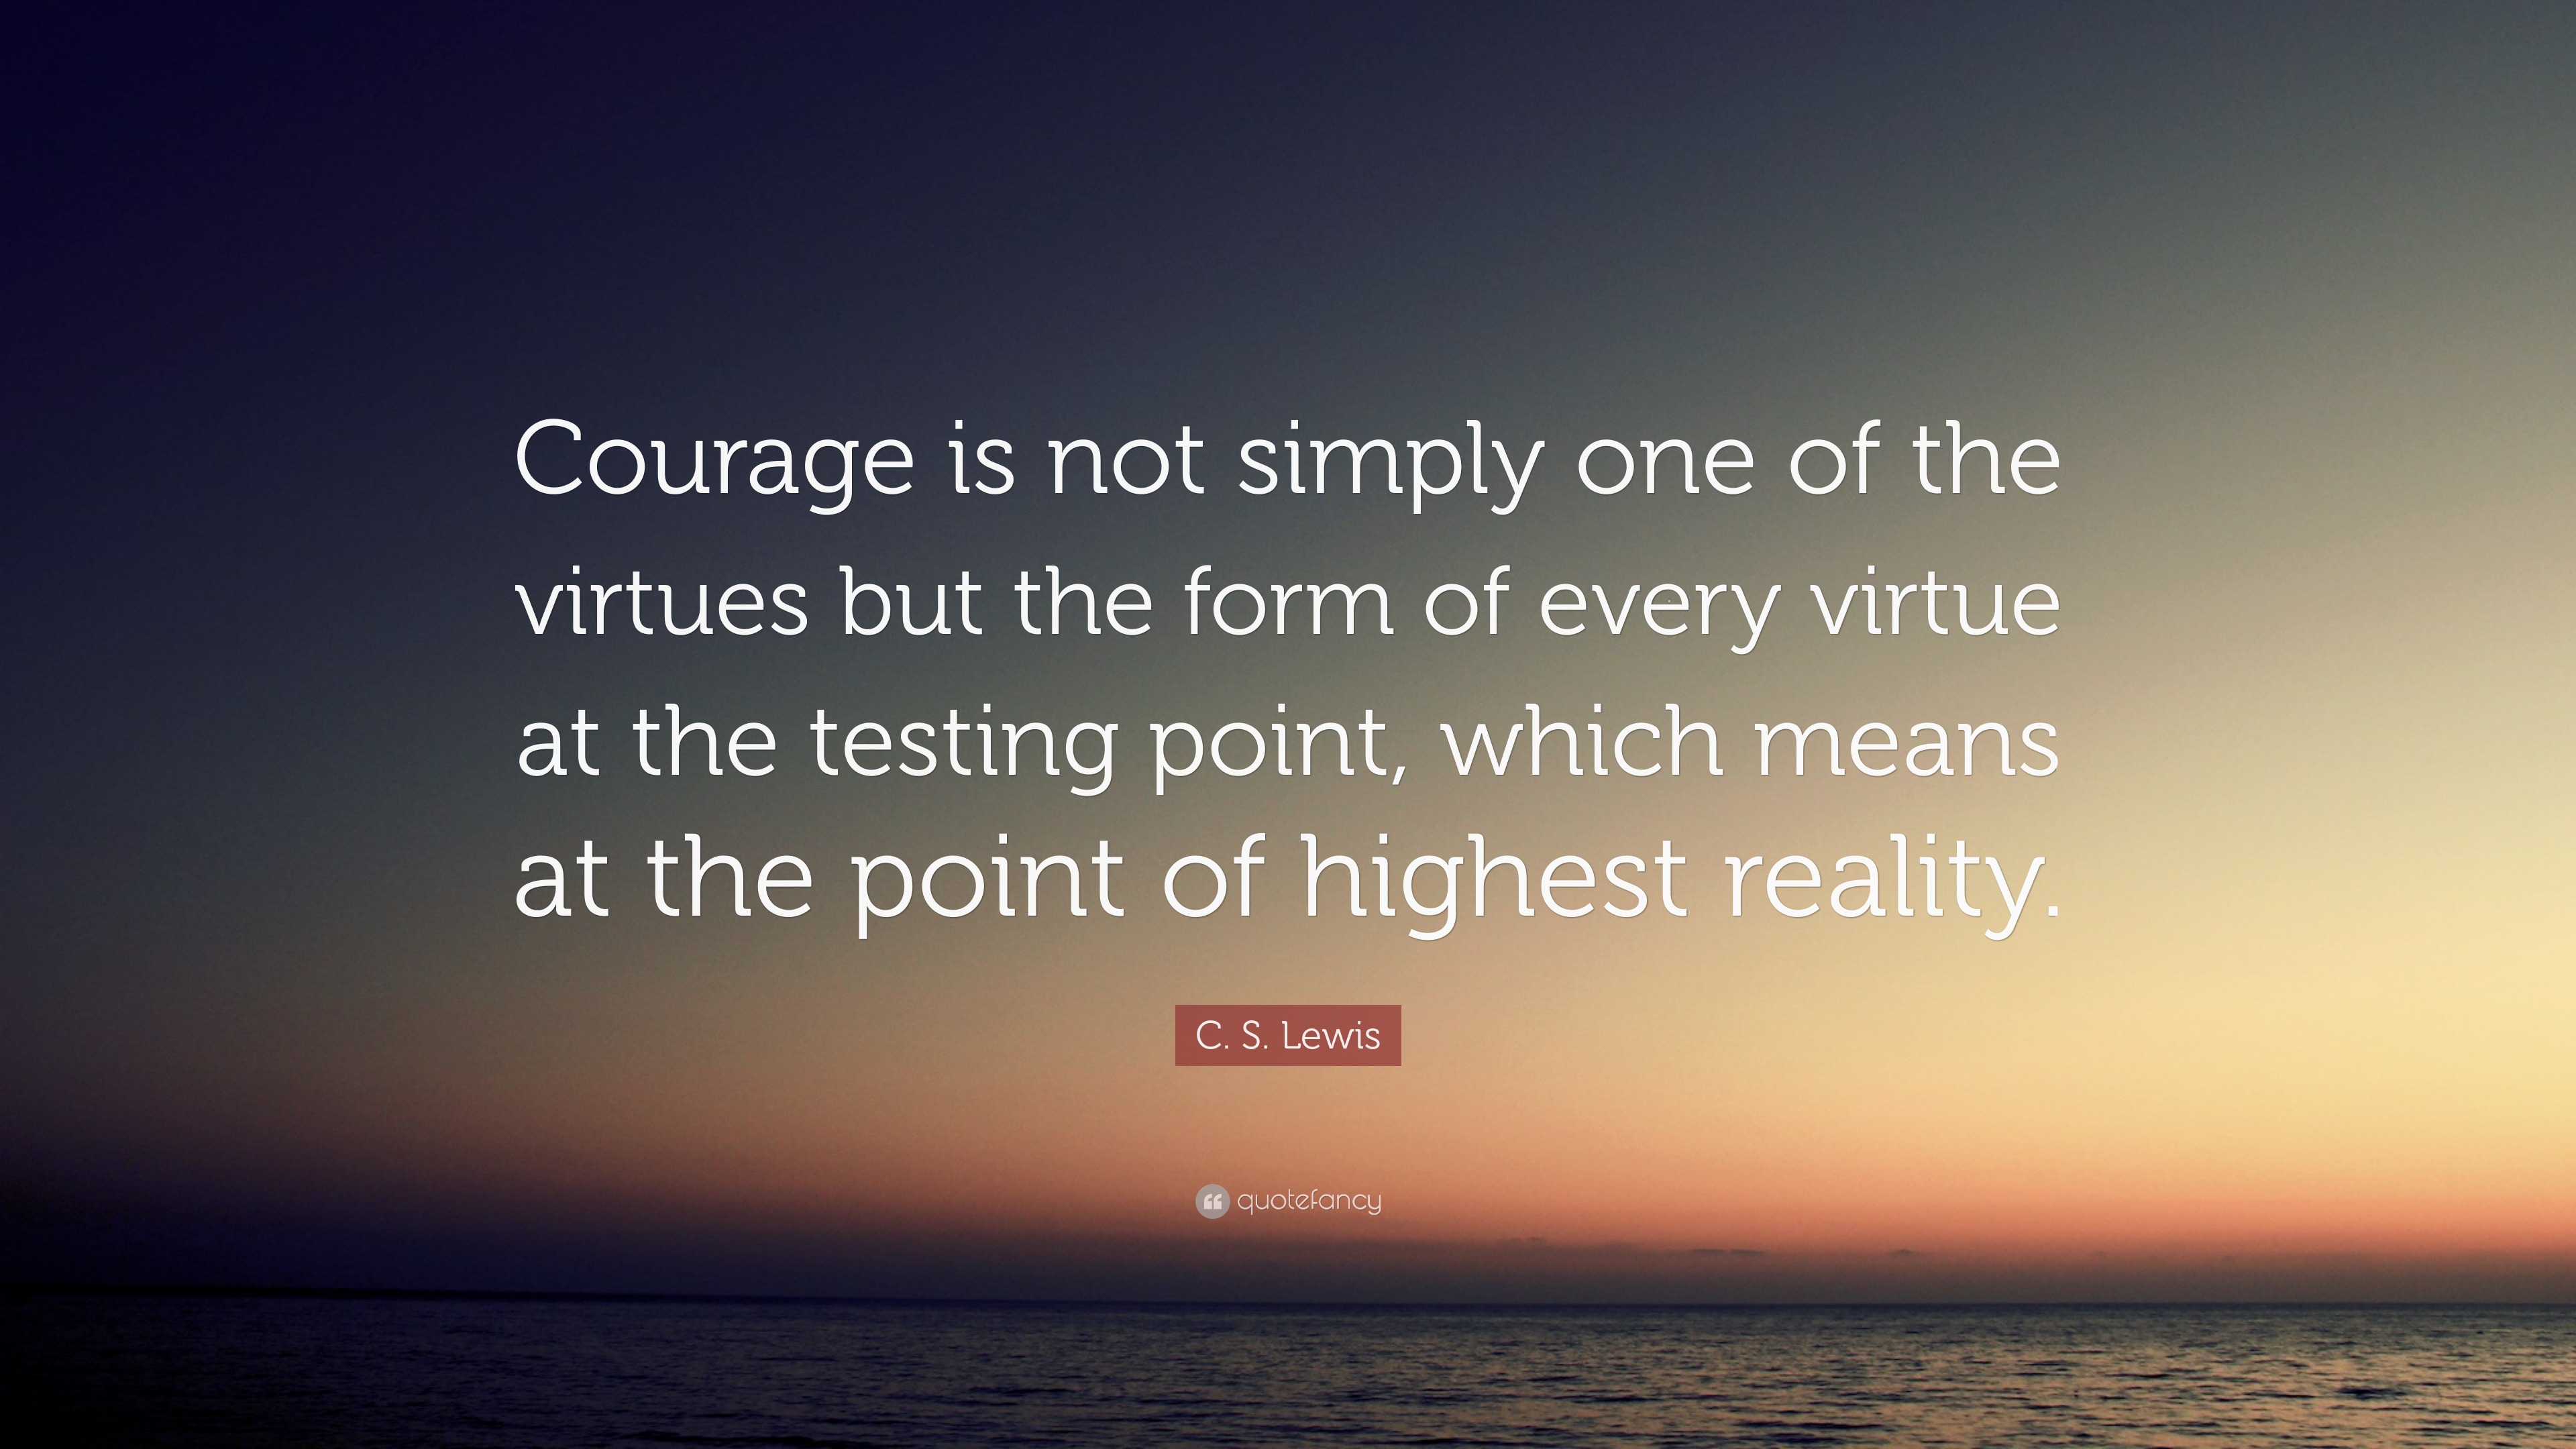 C. S. Lewis Quote: “Courage is not simply one of the virtues but the ...